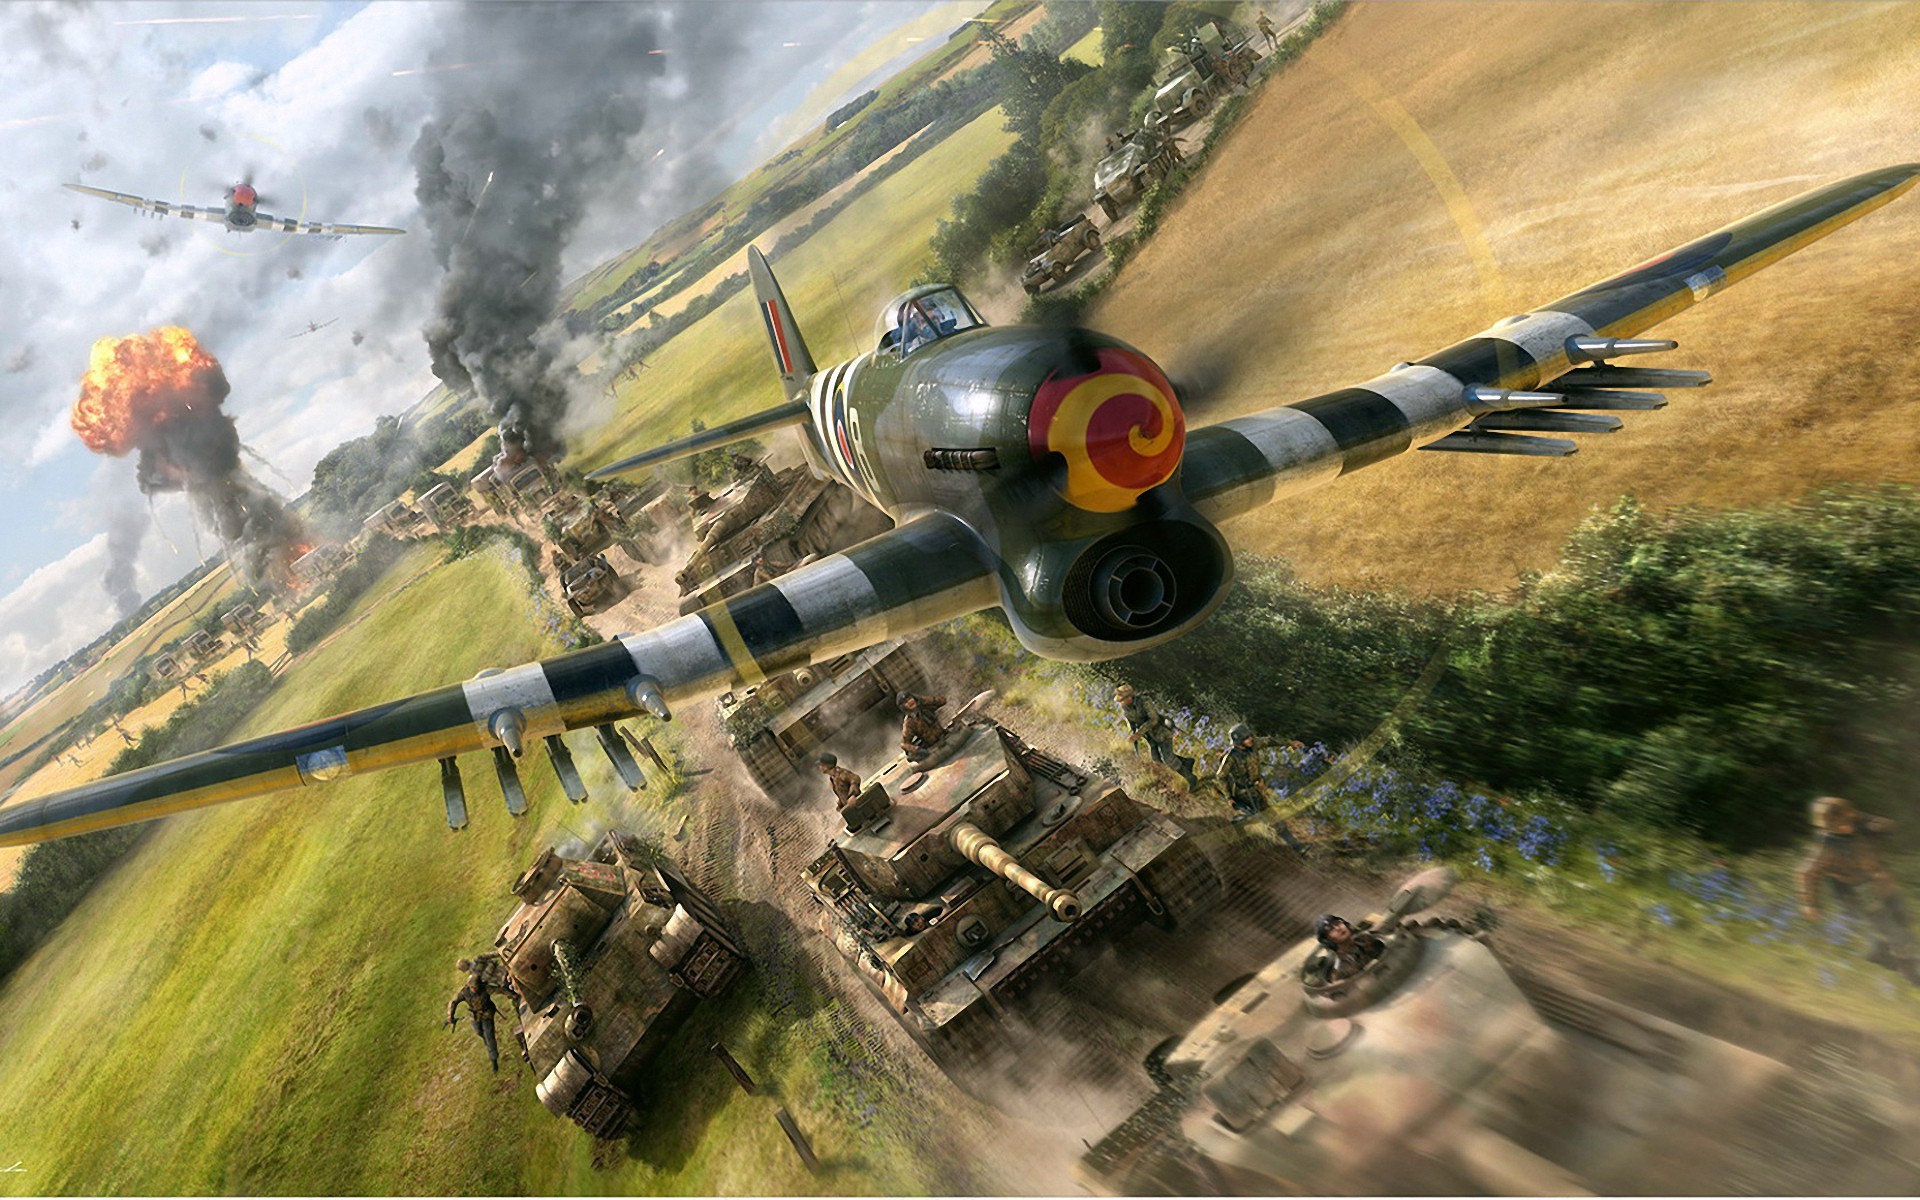 Planes And Tanks Wallpaper Image Pictures Photos